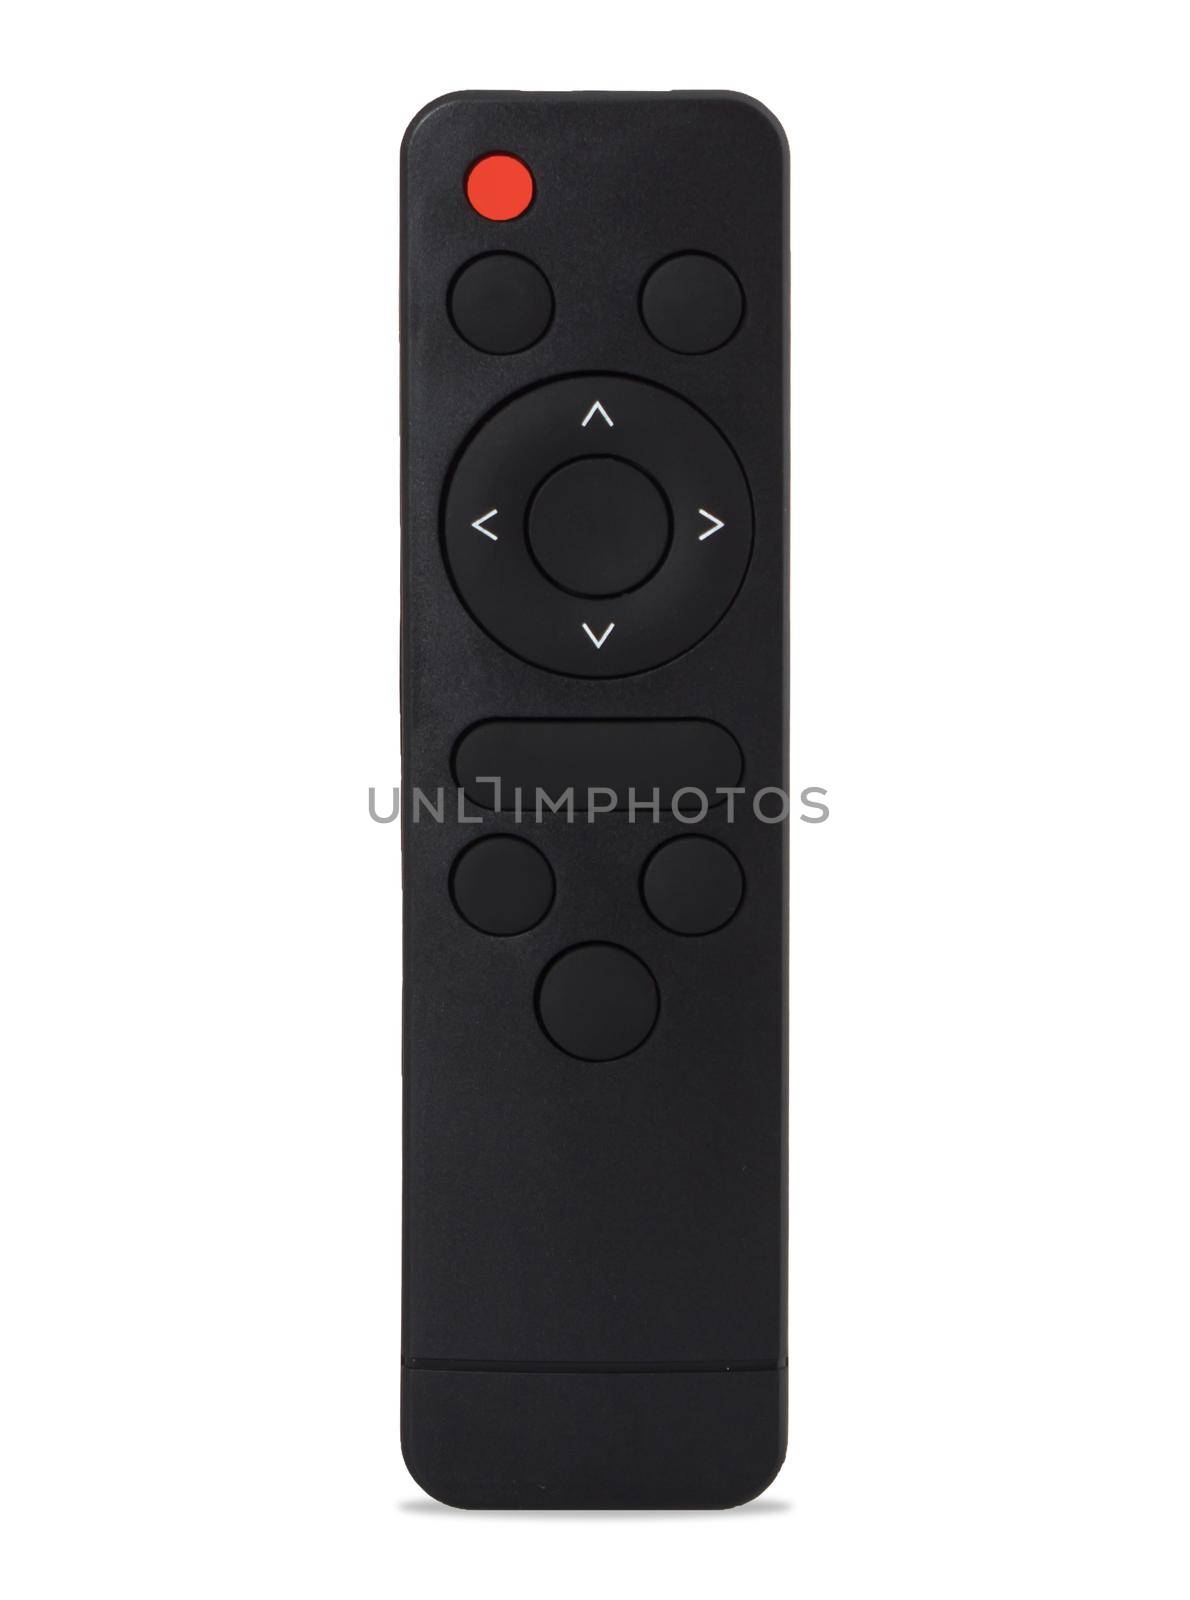 remote control for a TV or other household appliances isolated on a white background